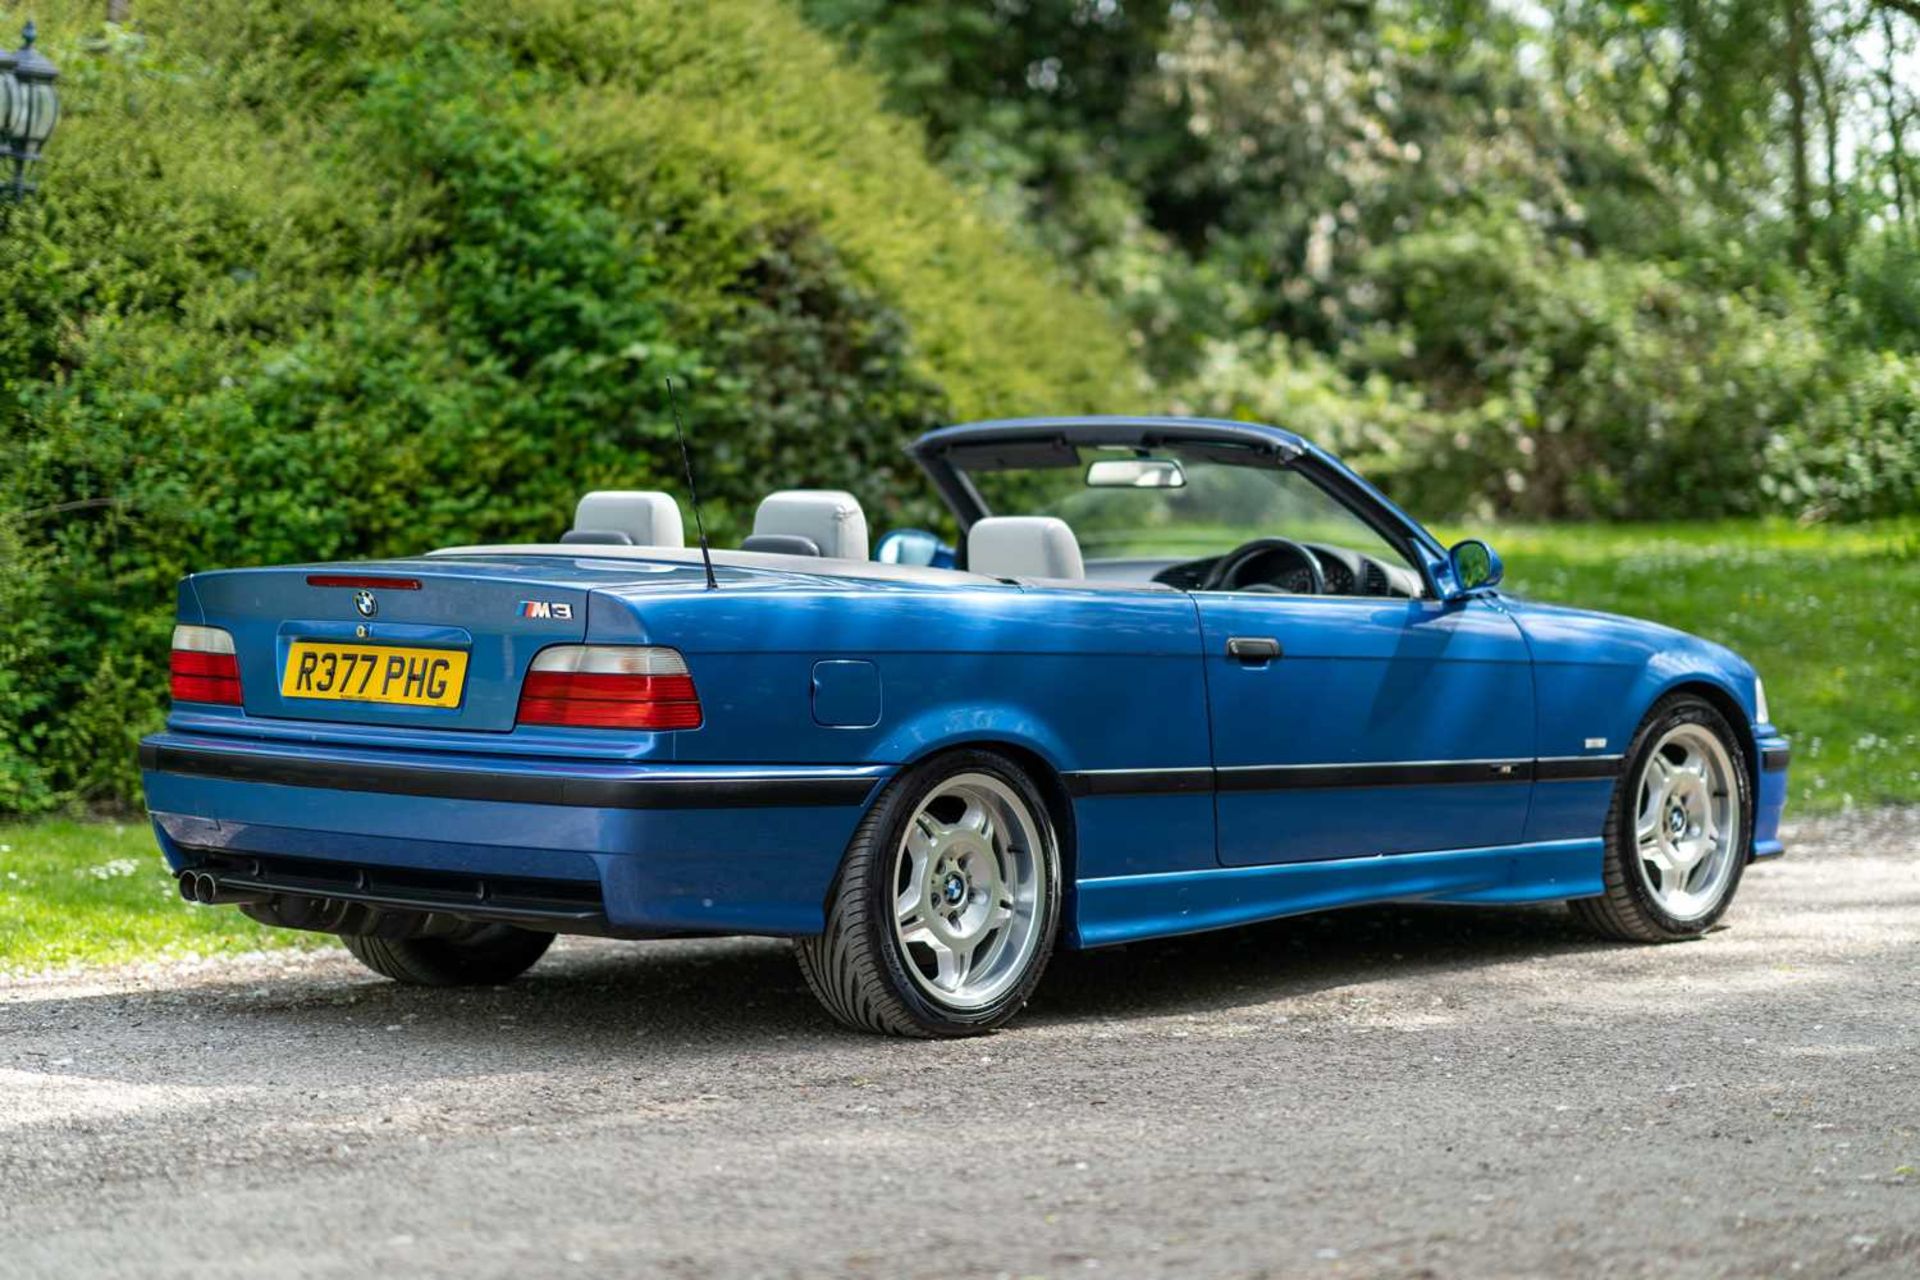 1998 BMW M3 Evolution Convertible Only 54,000 miles and full service history - Image 83 of 89